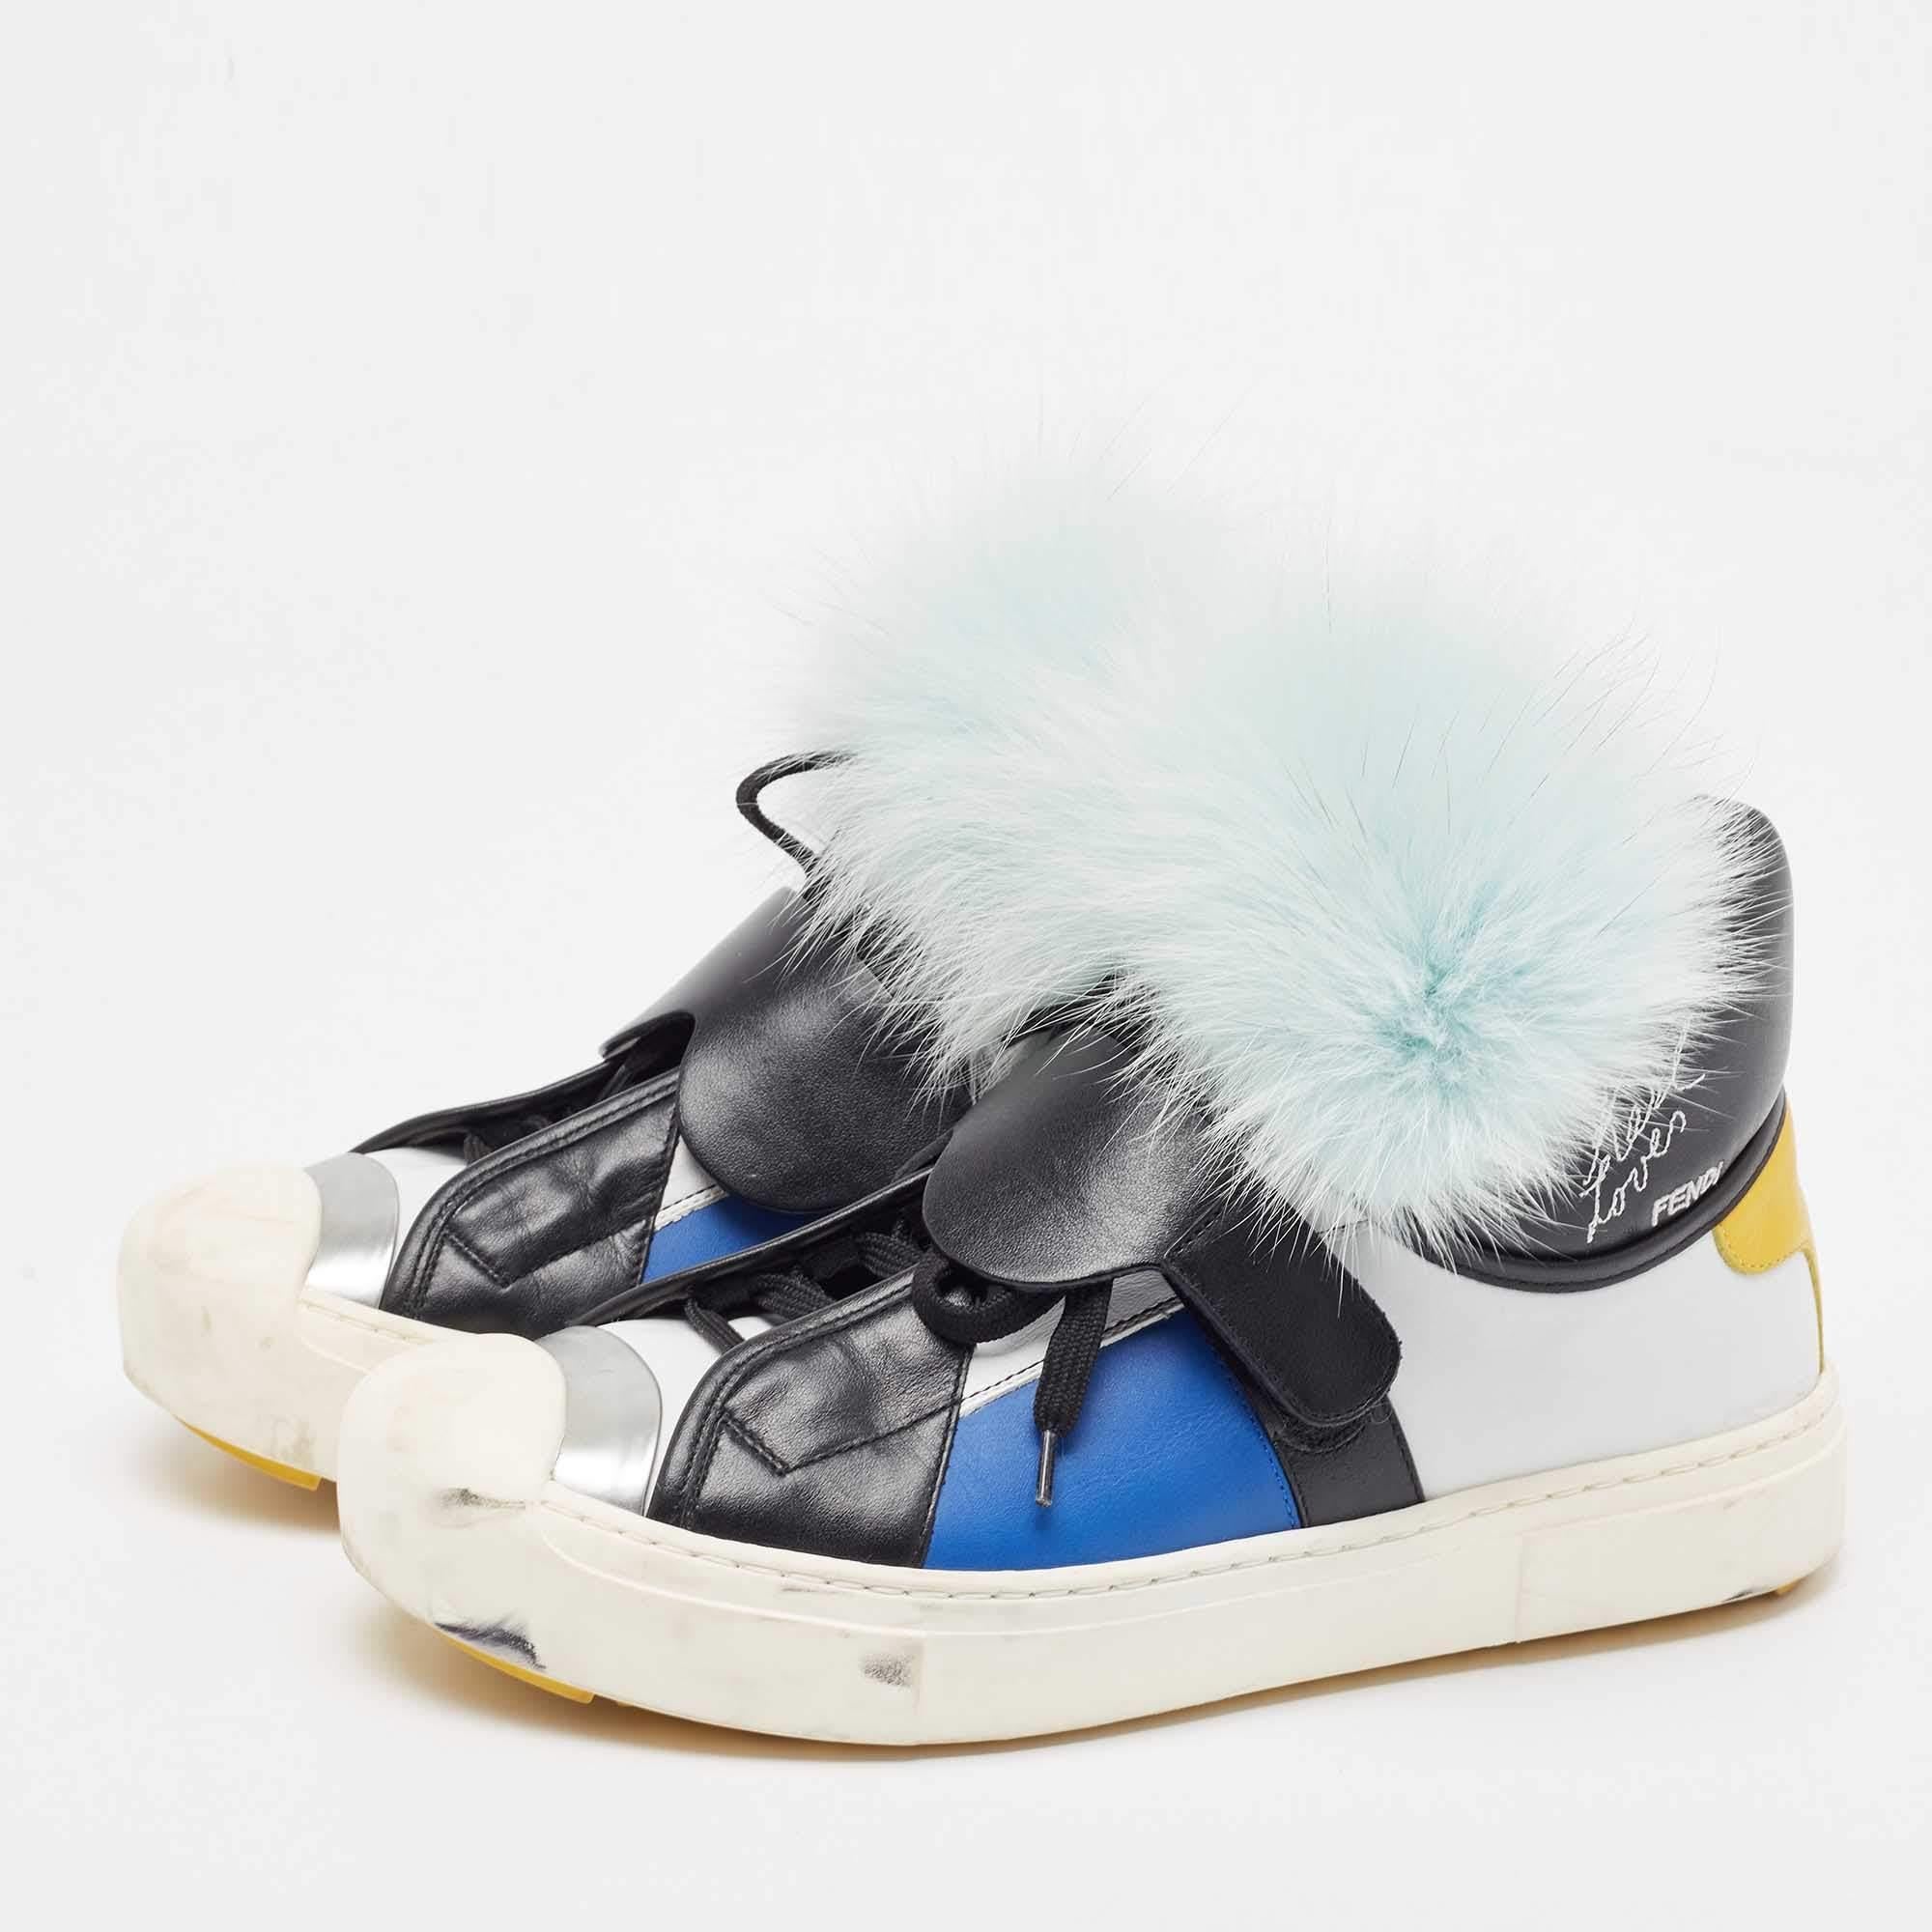 Modeled on fashion icon Karl Lagerfeld, the Karlito range of designs from Fendi is fun and full of character. These sneakers come crafted from multicolored leather and designed with fur on the laced uppers.

